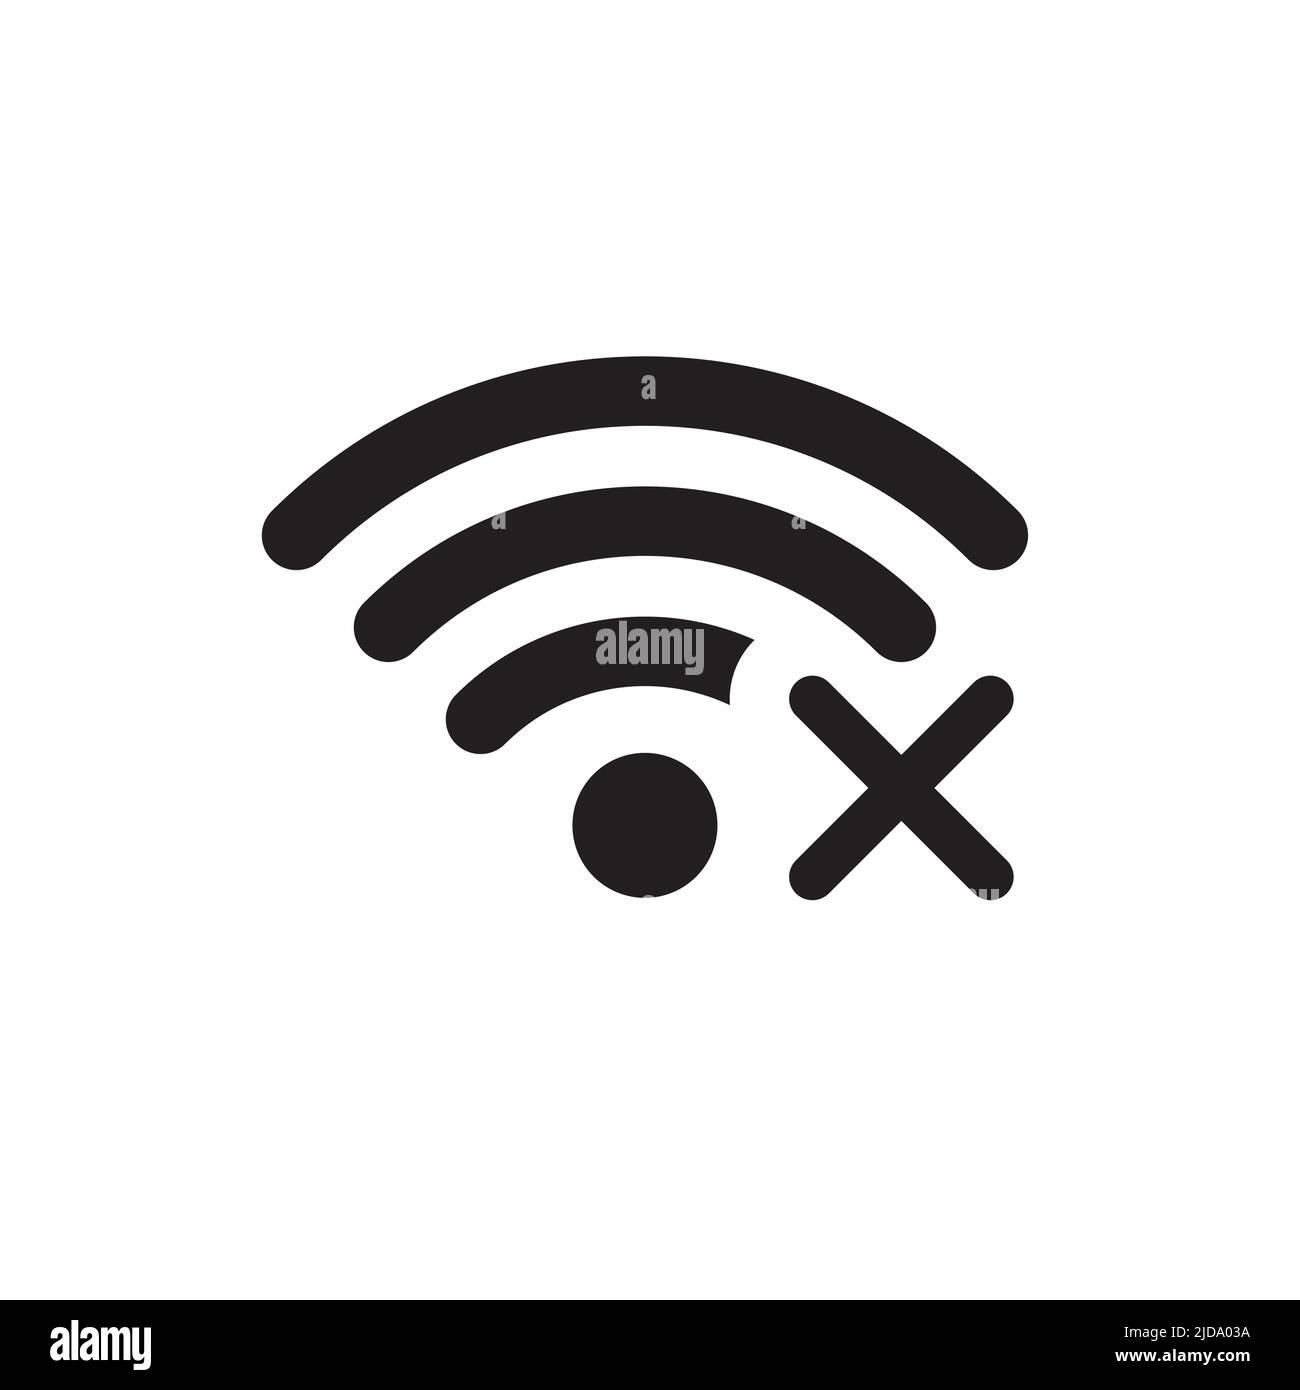 No wifi connection Vectors & Illustrations for Free Download